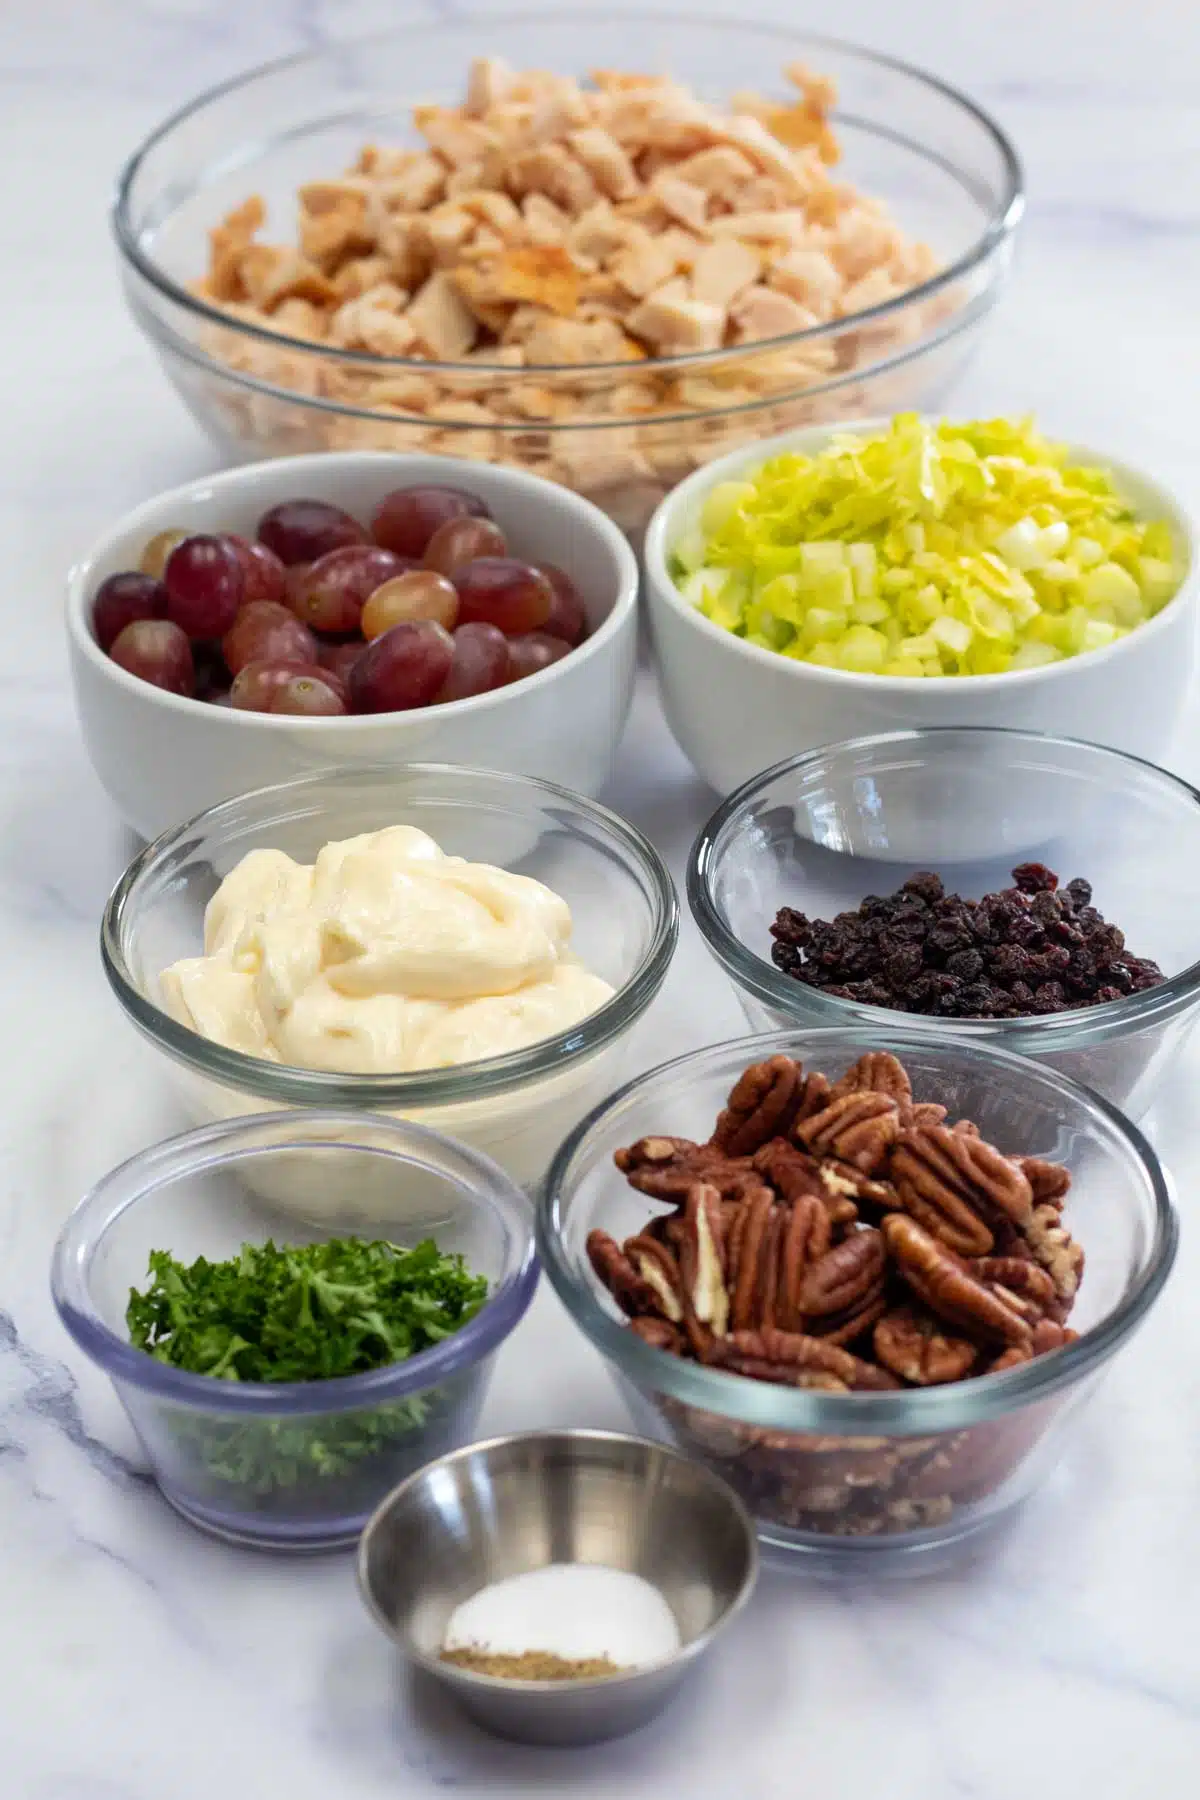 Tall image showing ingredients for chicken salad and grapes.